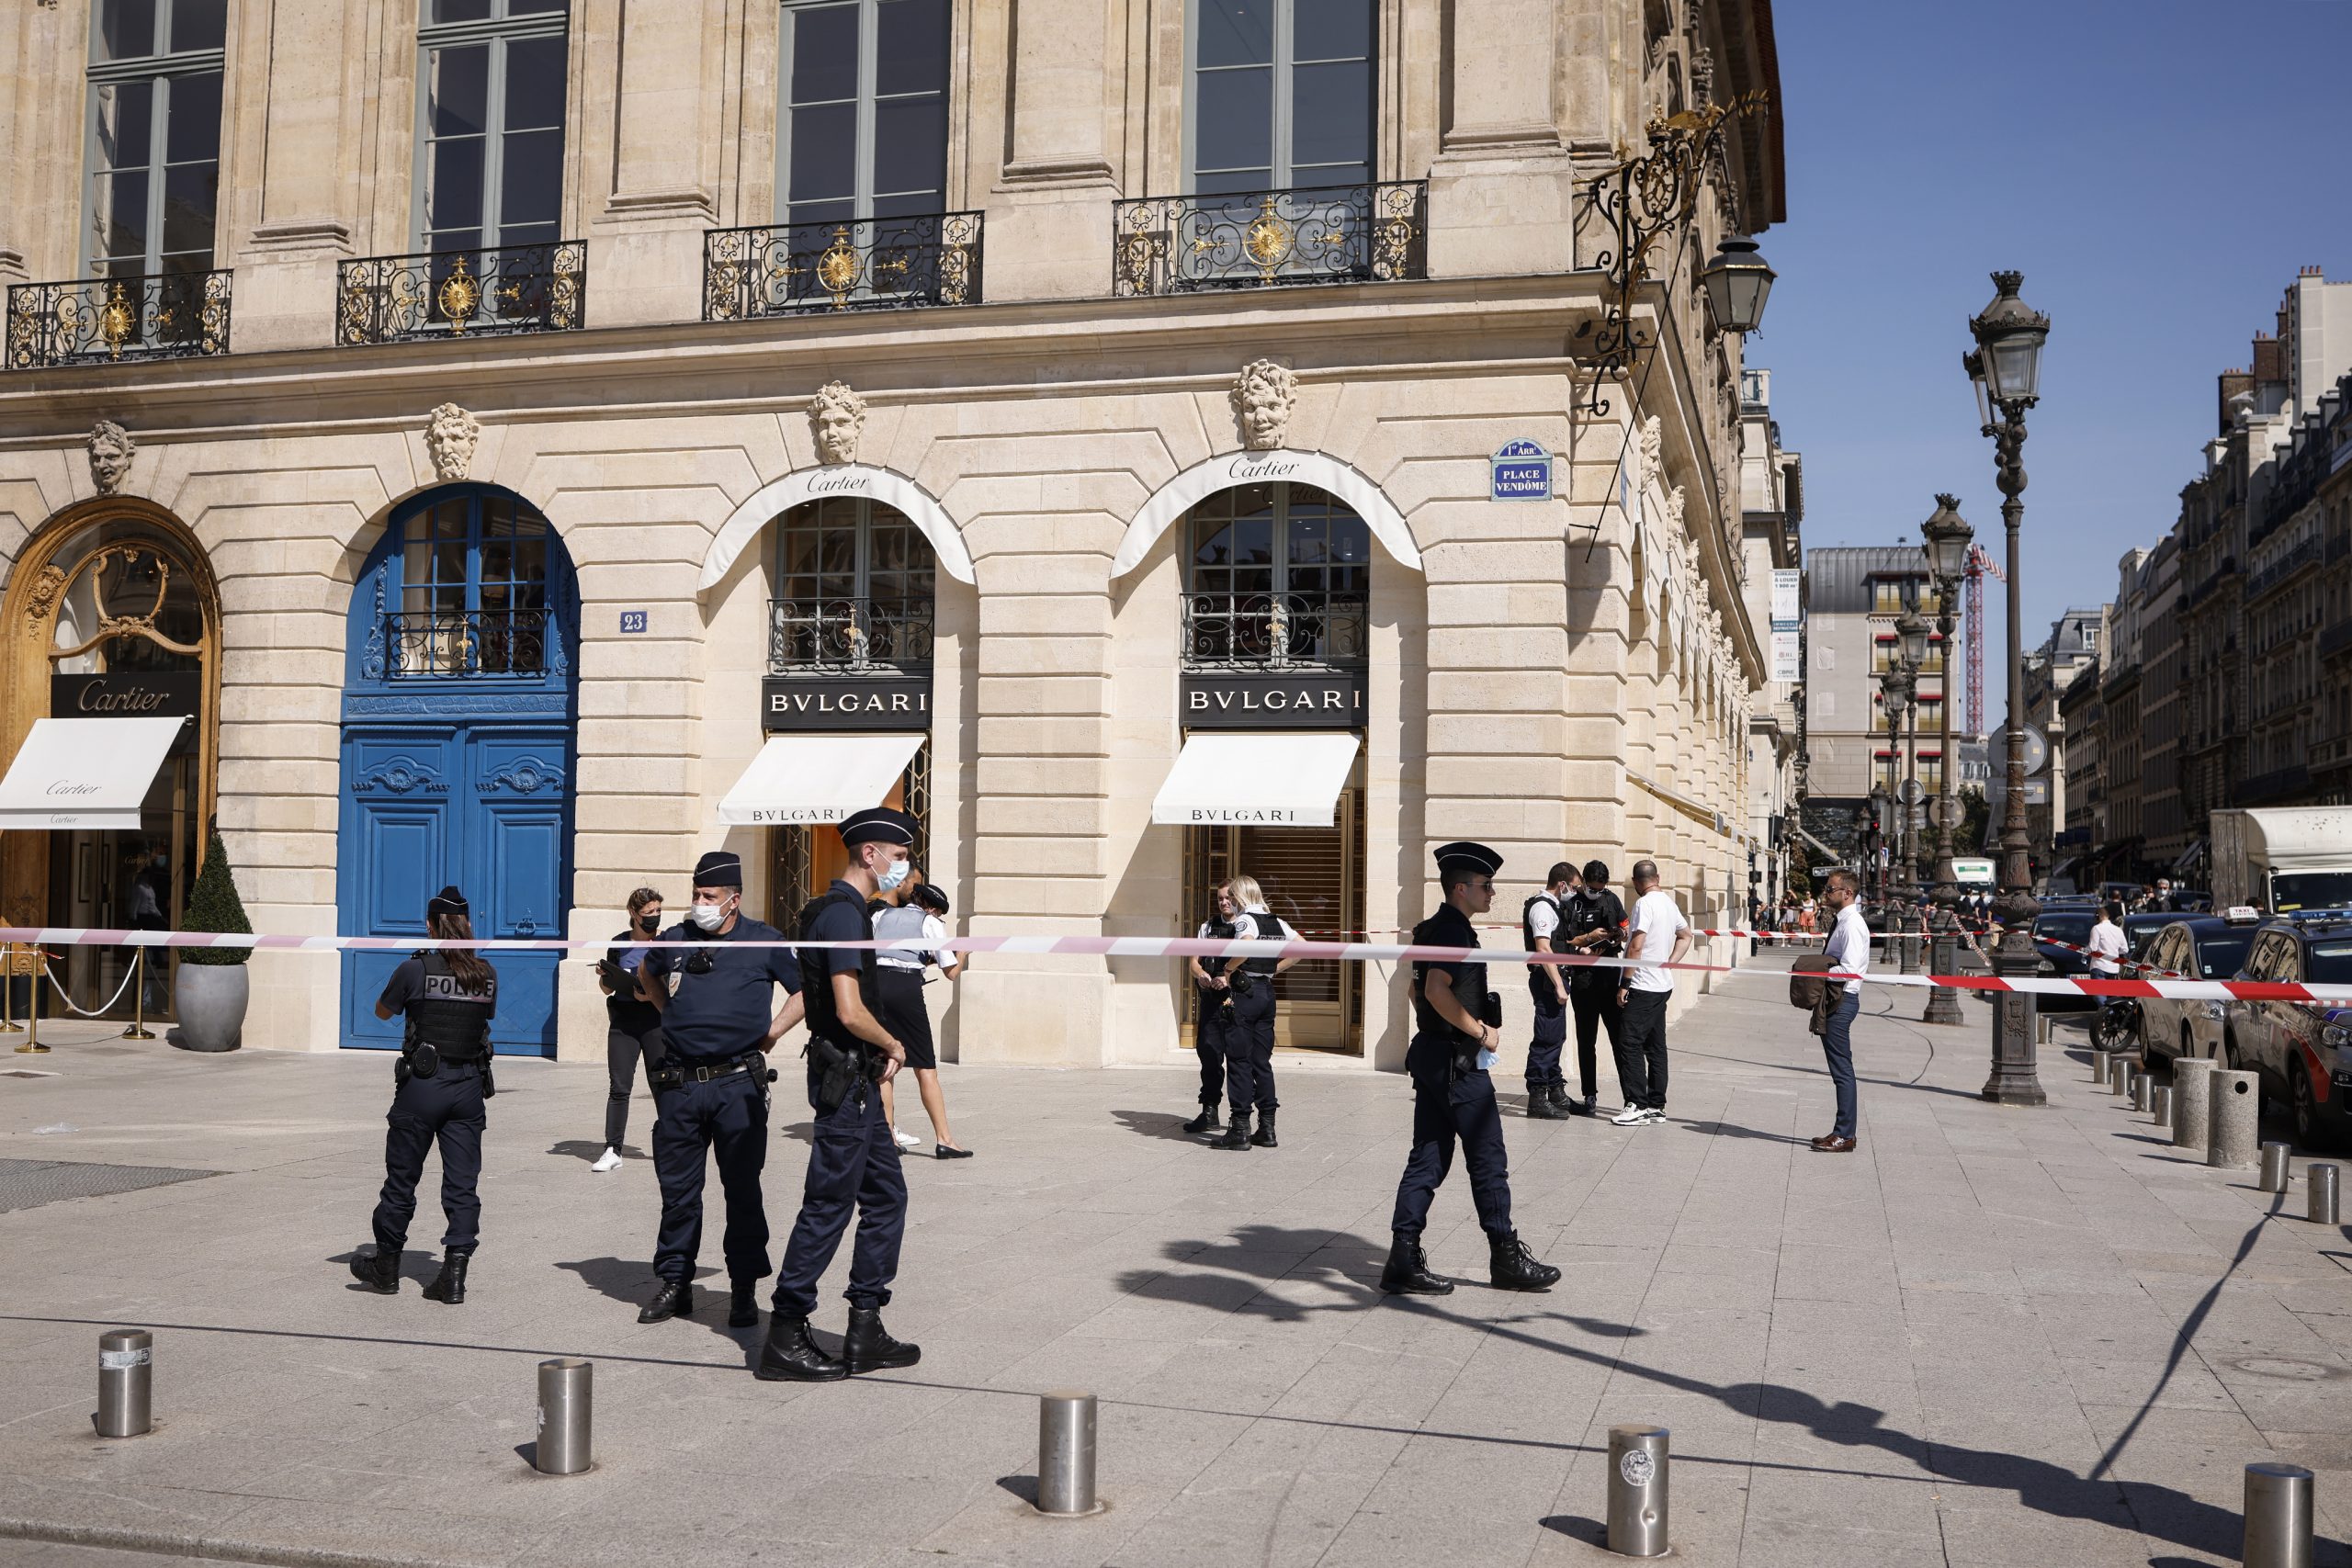 epa09453214 Policemen patrol in front of a Bulgari luxury Jewelry shop after a robbery at Place Vendome in Paris, France, 07 September 2021. According to police, two alleged perpetrators were arrested.  EPA/YOAN VALAT